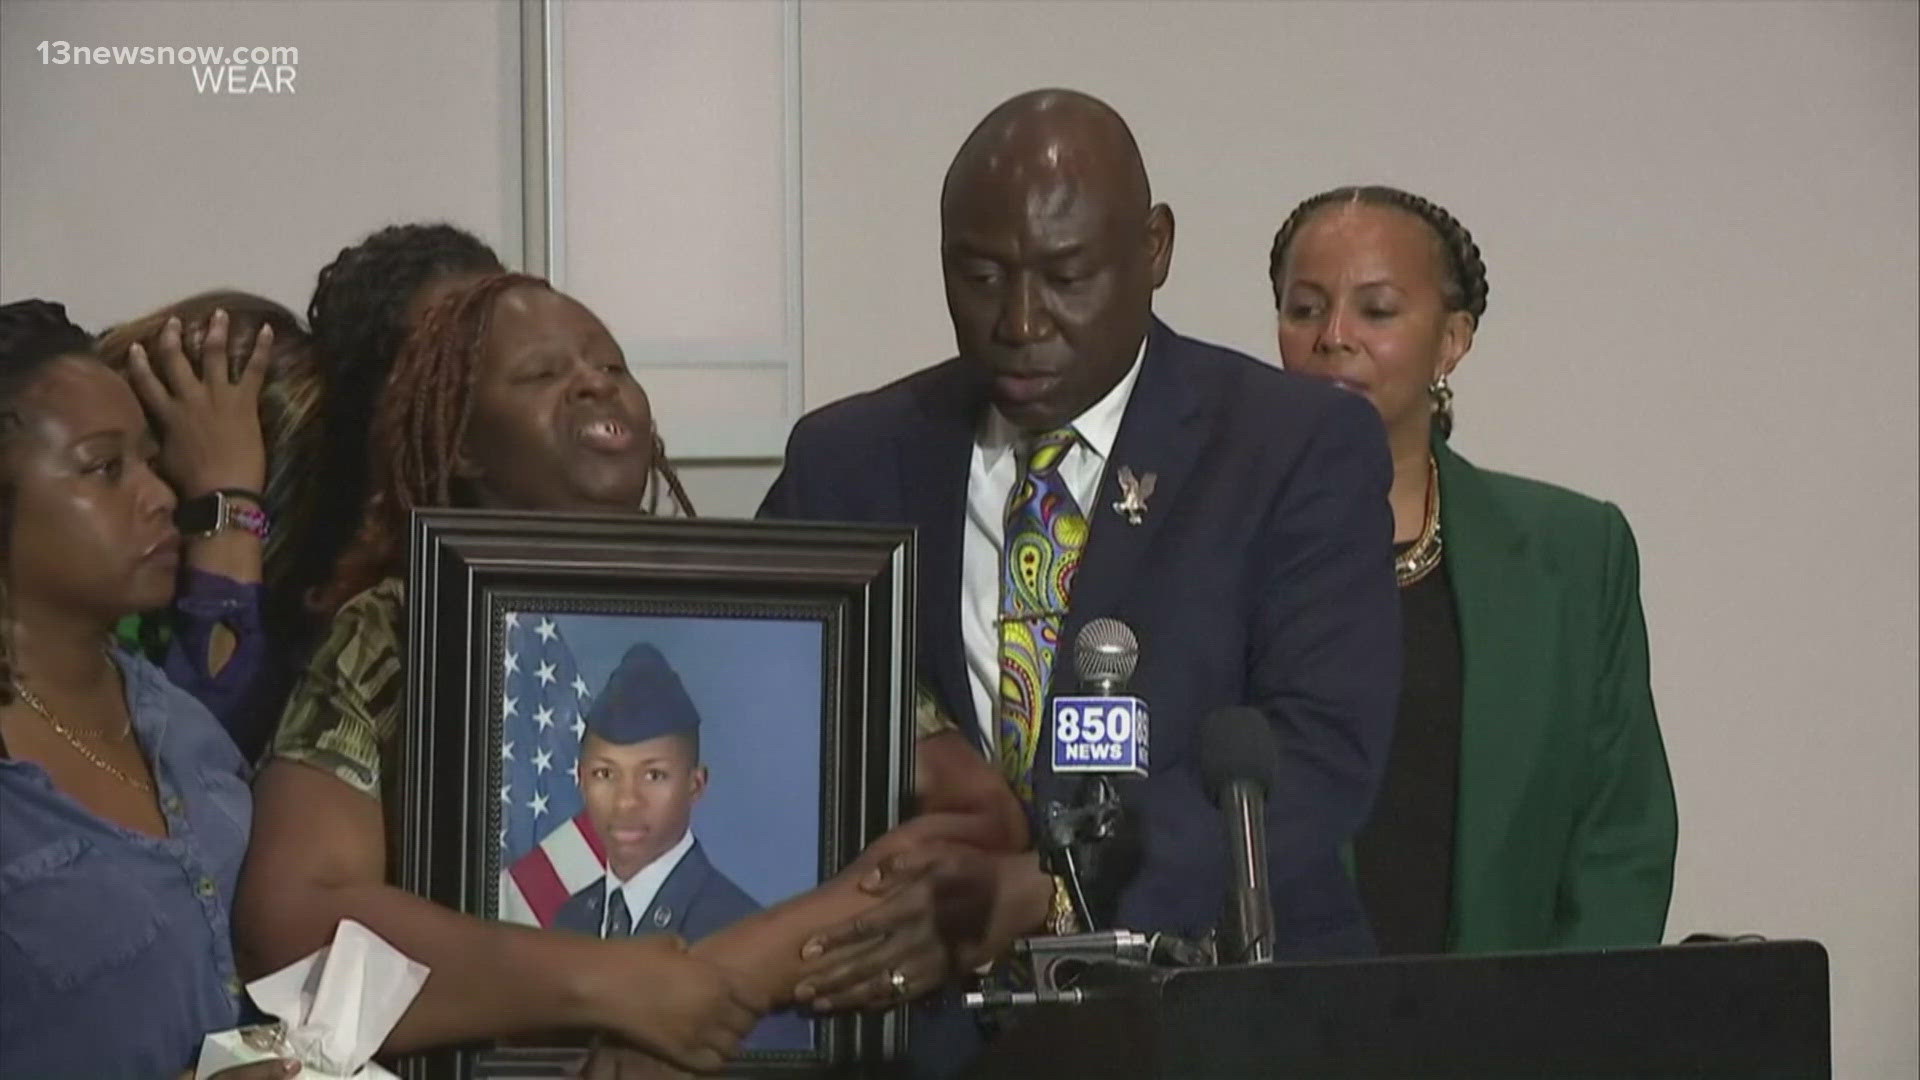 A new criminal investigation into whether a Florida deputy was justified in fatally shooting 23-year-old U.S. Airman Roger Fortson in his own home.